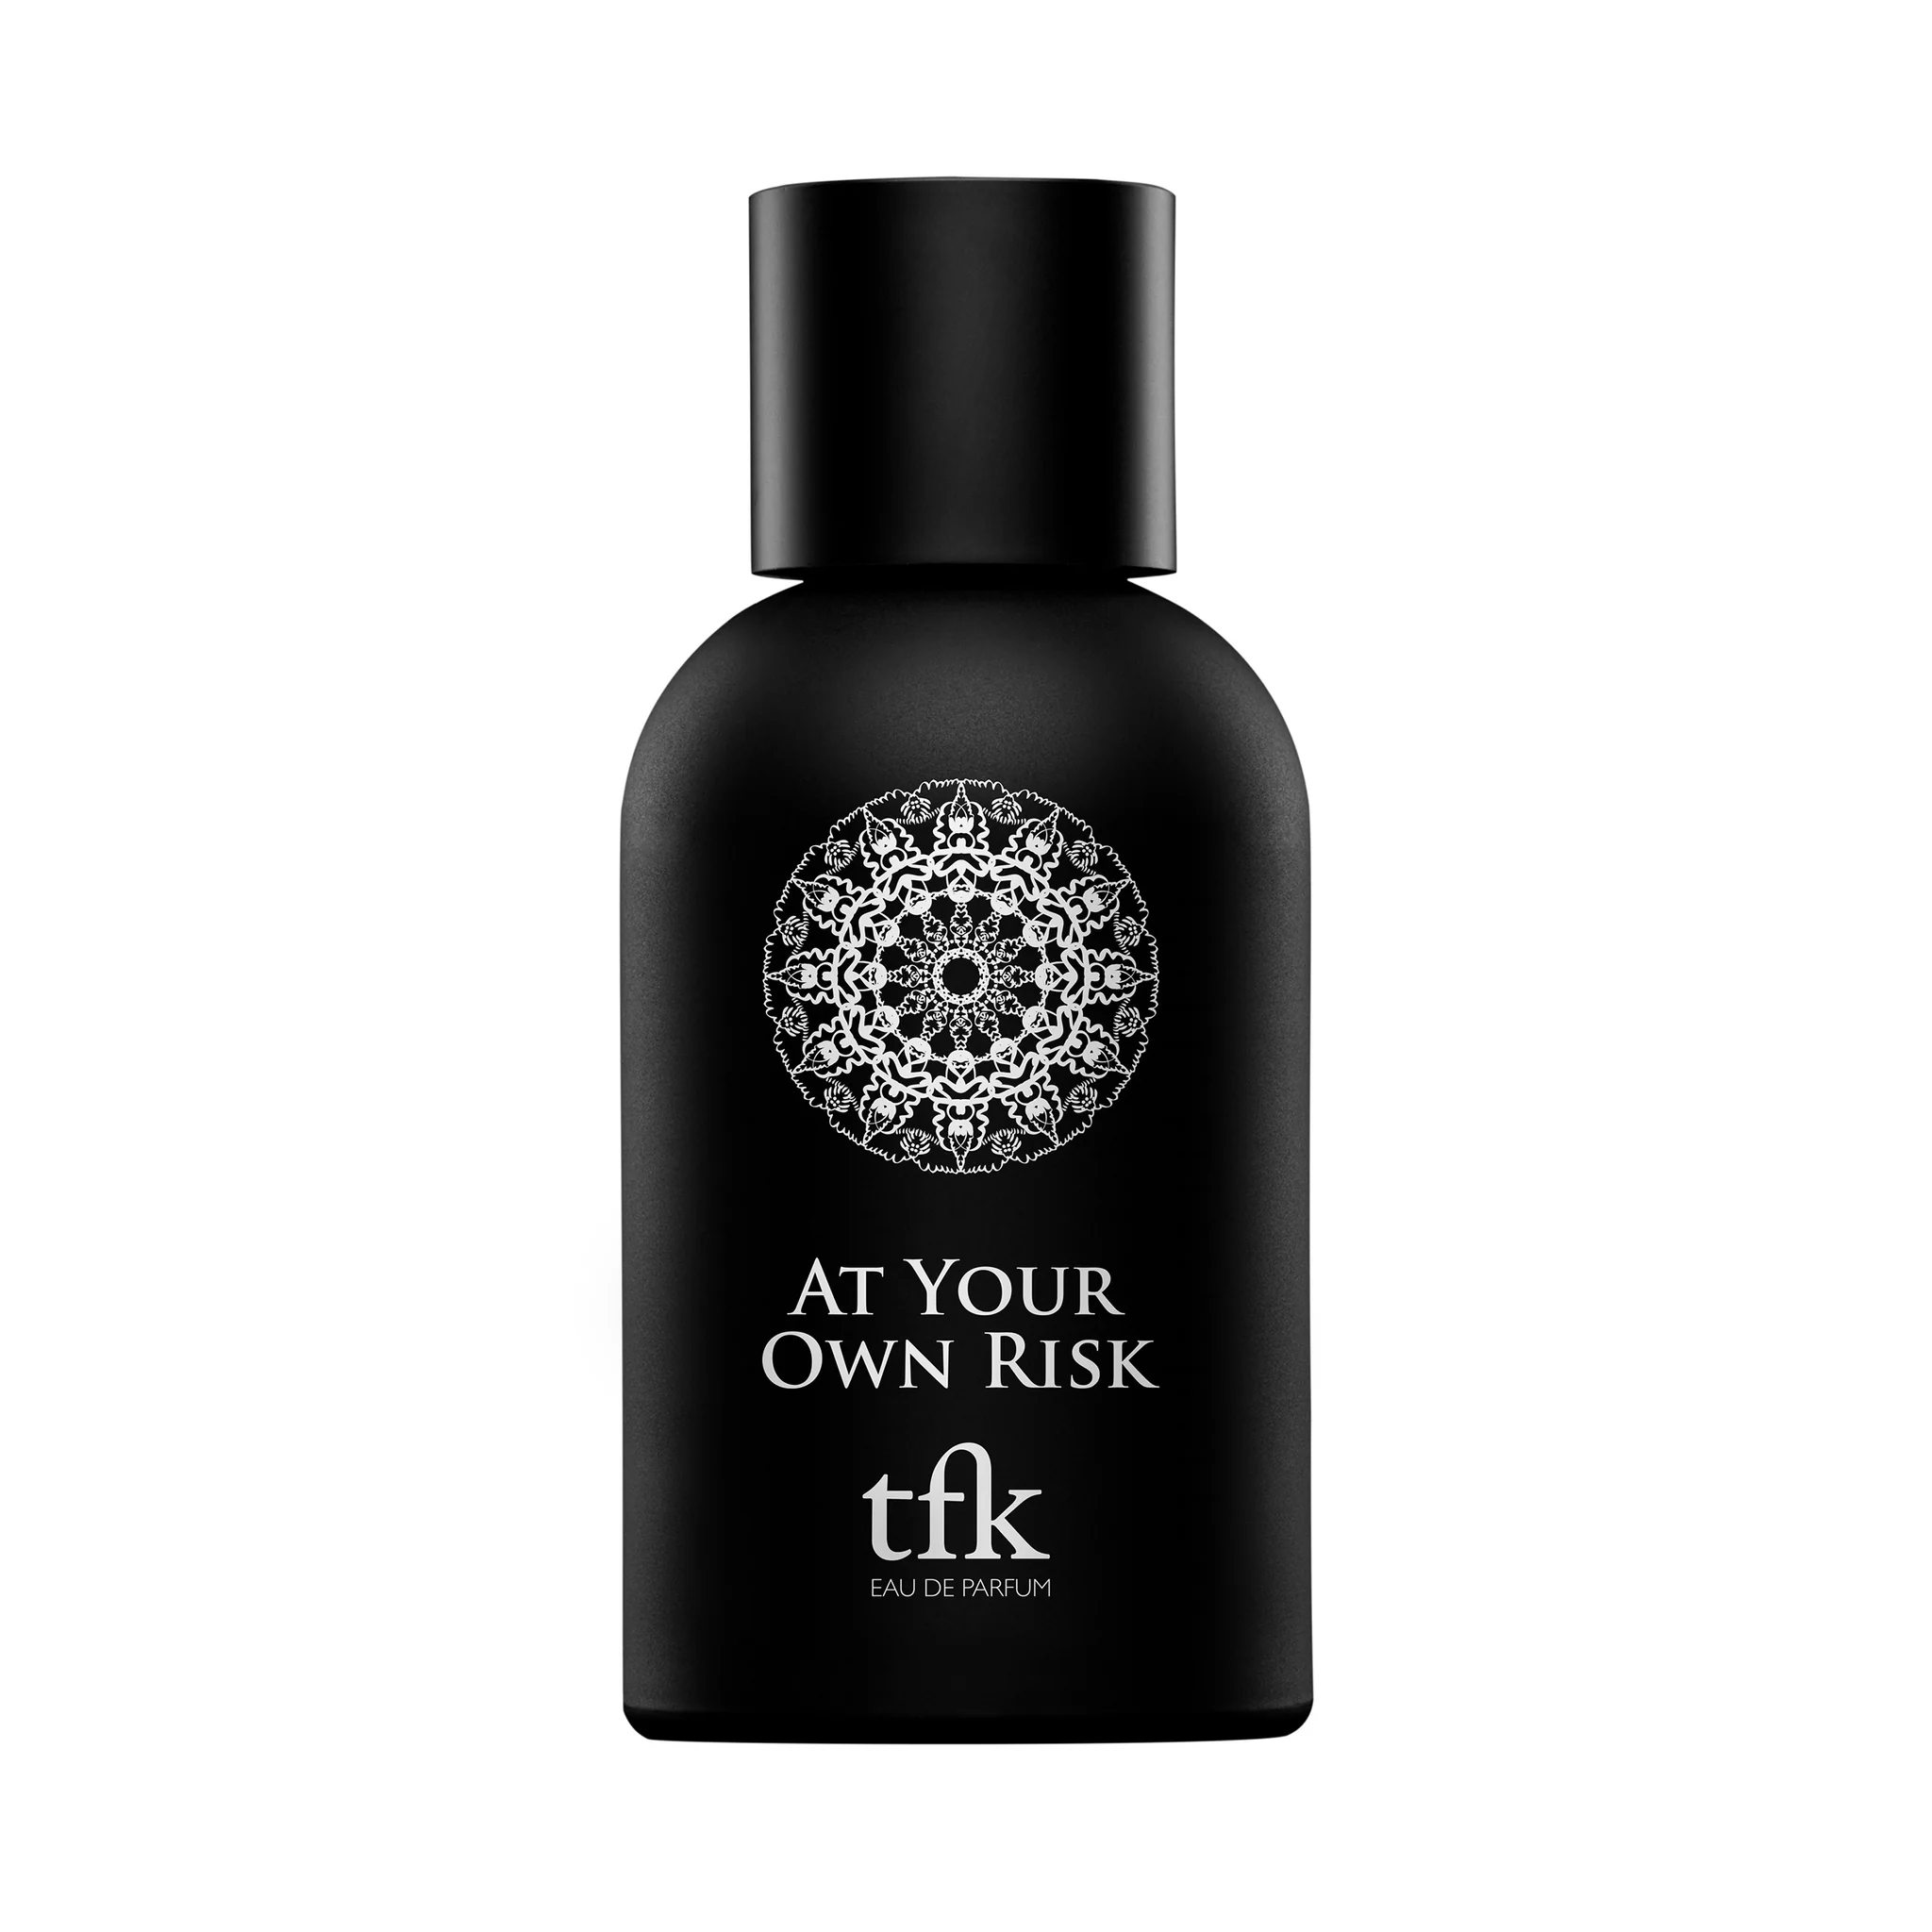 TFK_AT_YOUR_OWN_RISK_the_fragrance_kitchen_perfume_luxury_100ML_1024x1024@2x.webp